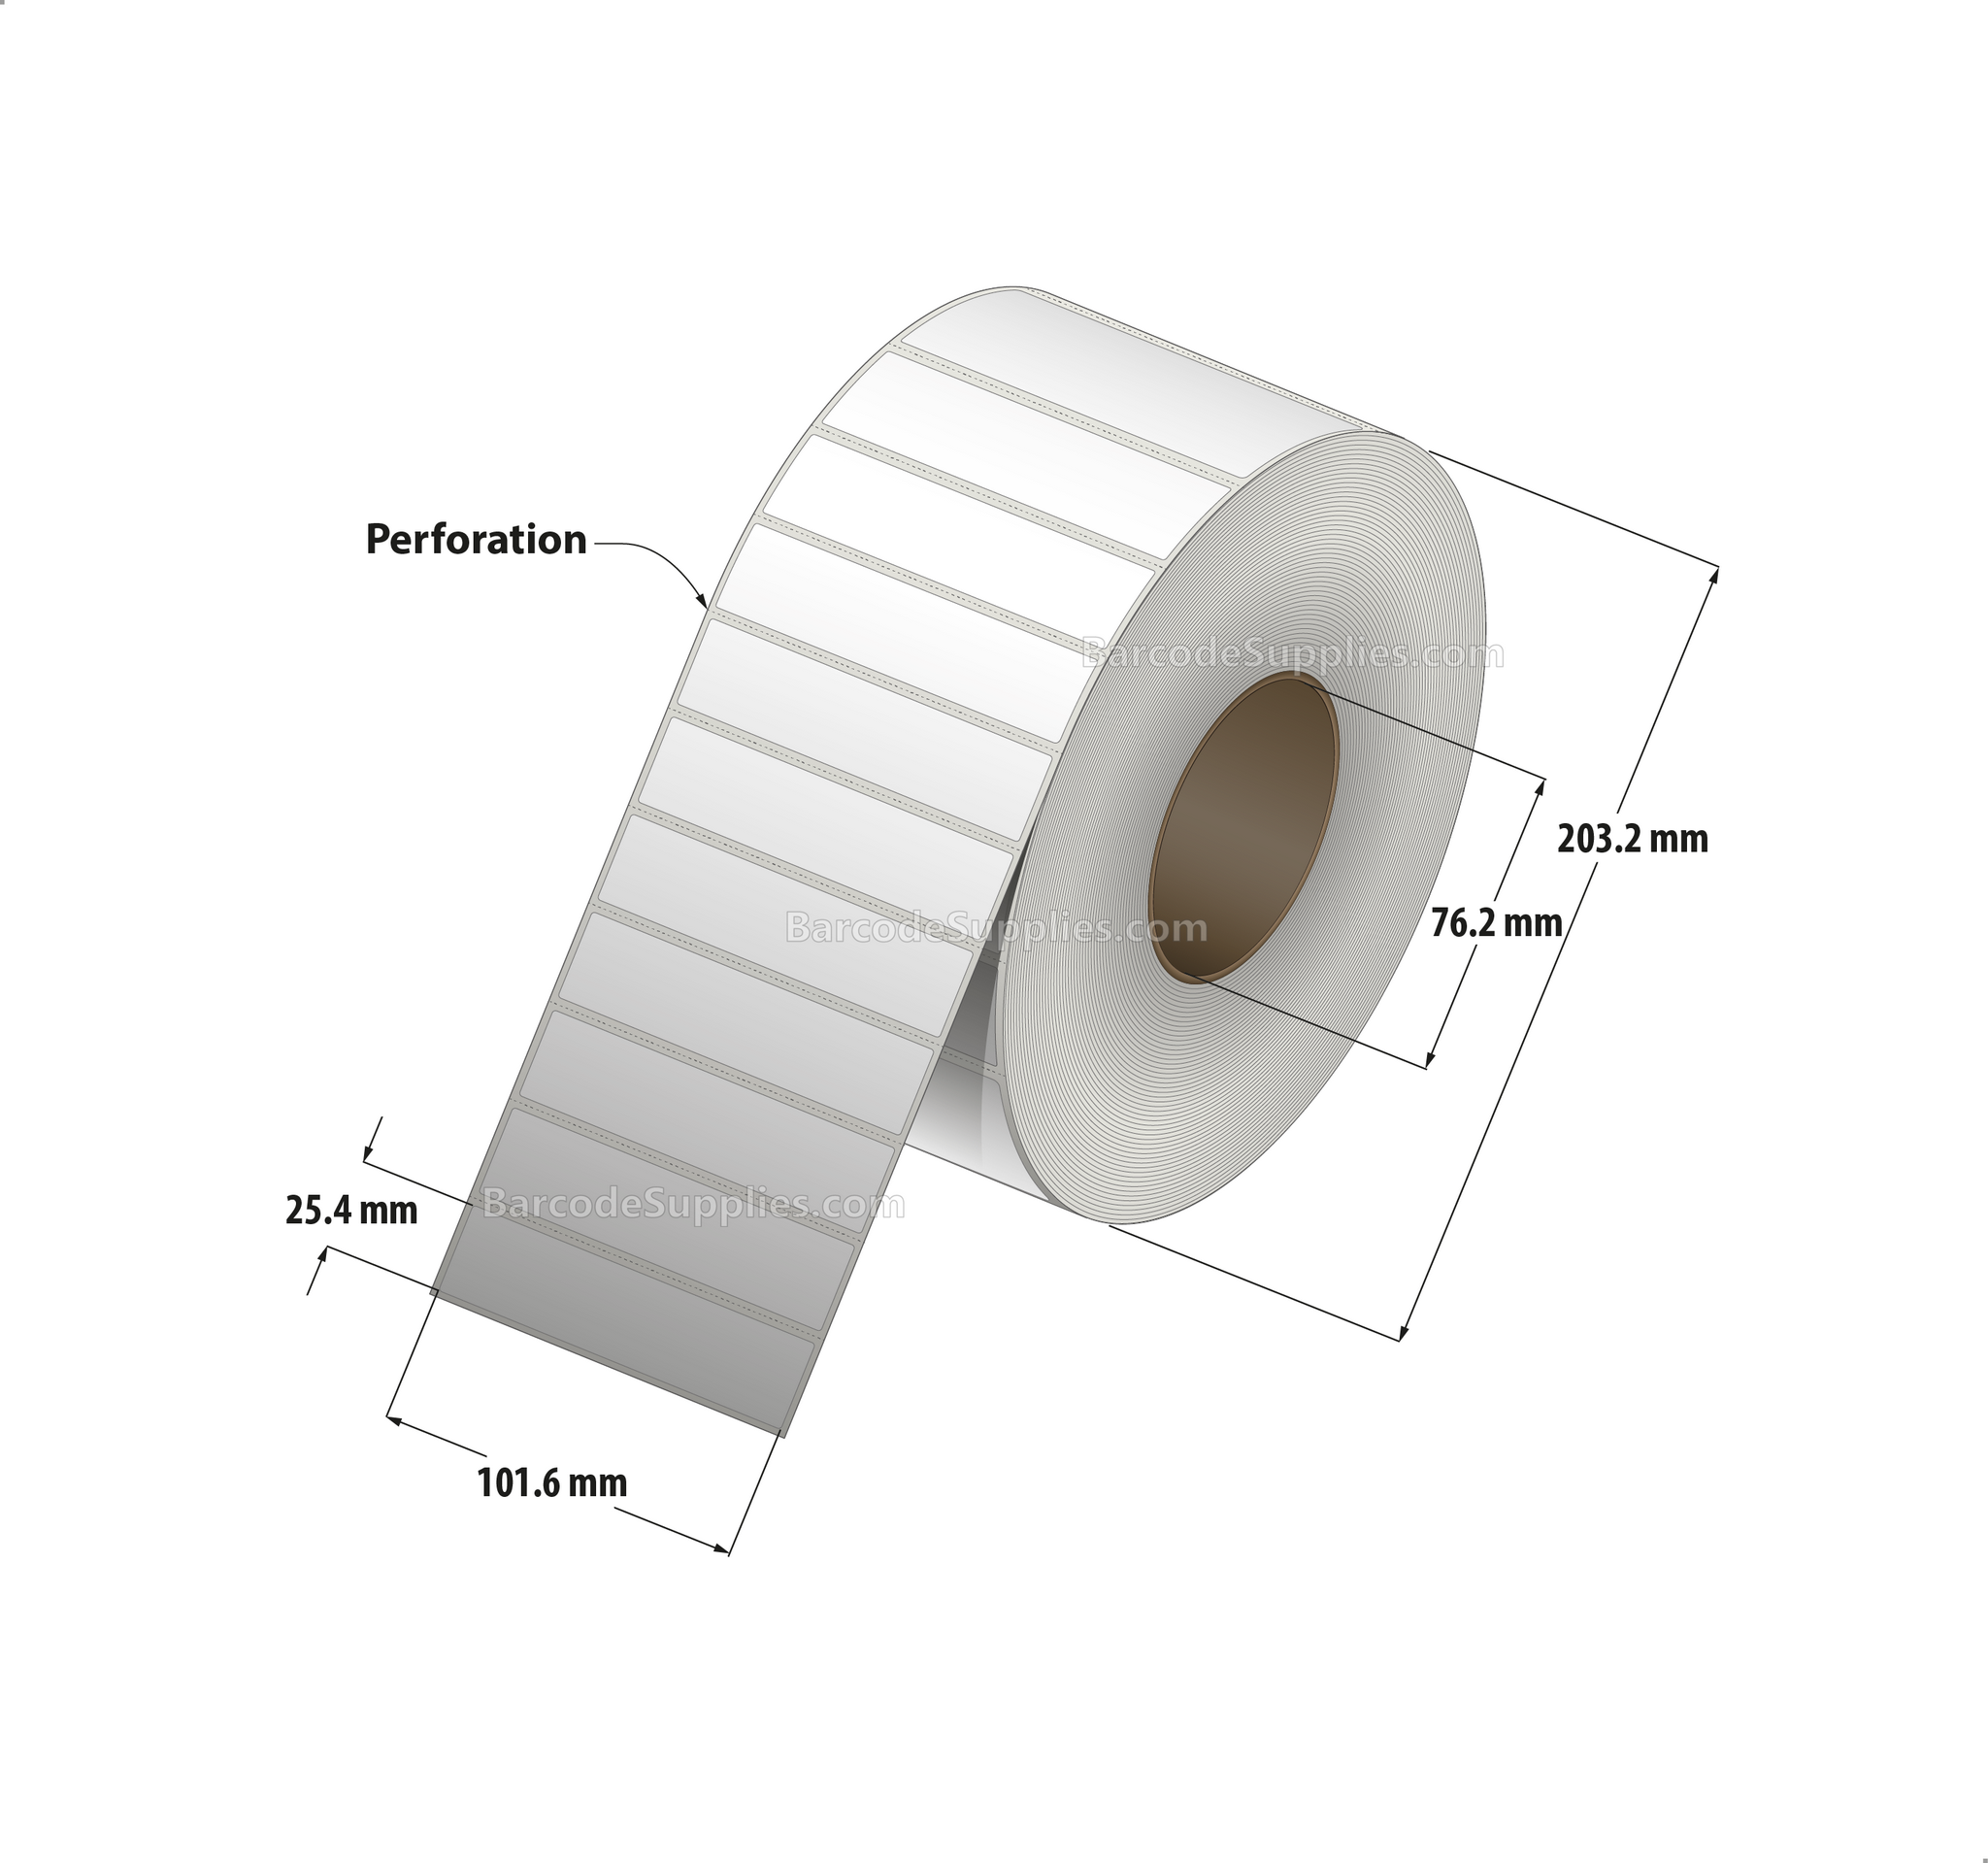 4 x 1 Thermal Transfer White Labels With Permanent Acrylic Adhesive - Perforated - 5500 Labels Per Roll - Carton Of 4 Rolls - 22000 Labels Total - MPN: TH41-1P